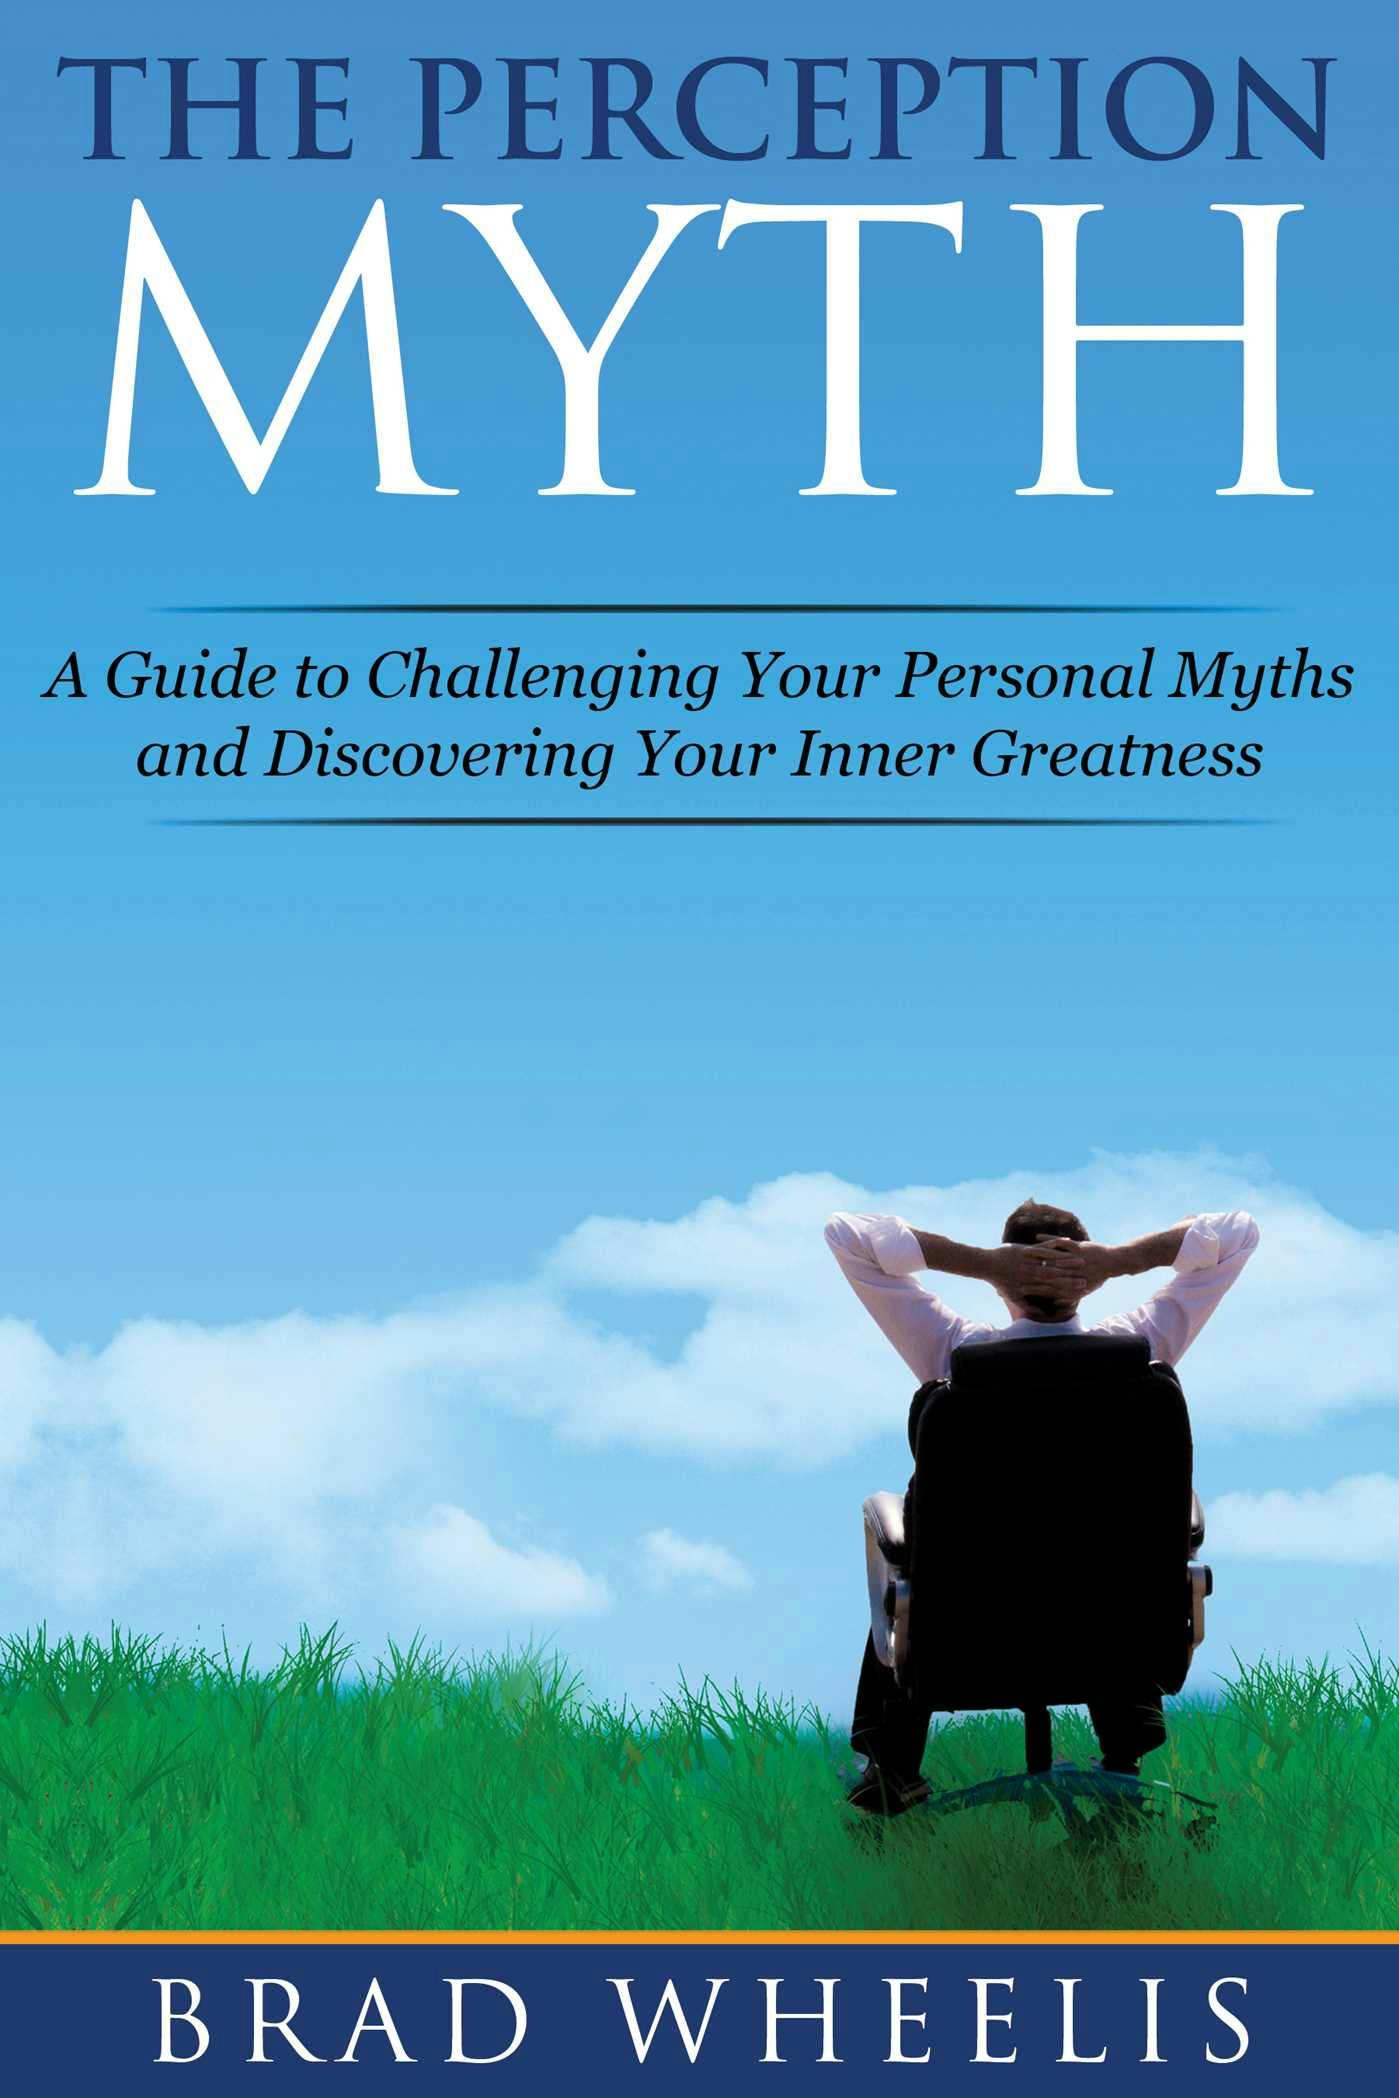 The Perception Myth: A Guide to Challenging Your Personal Myths and Discovering Your Inner Greatness - Brad Wheelis